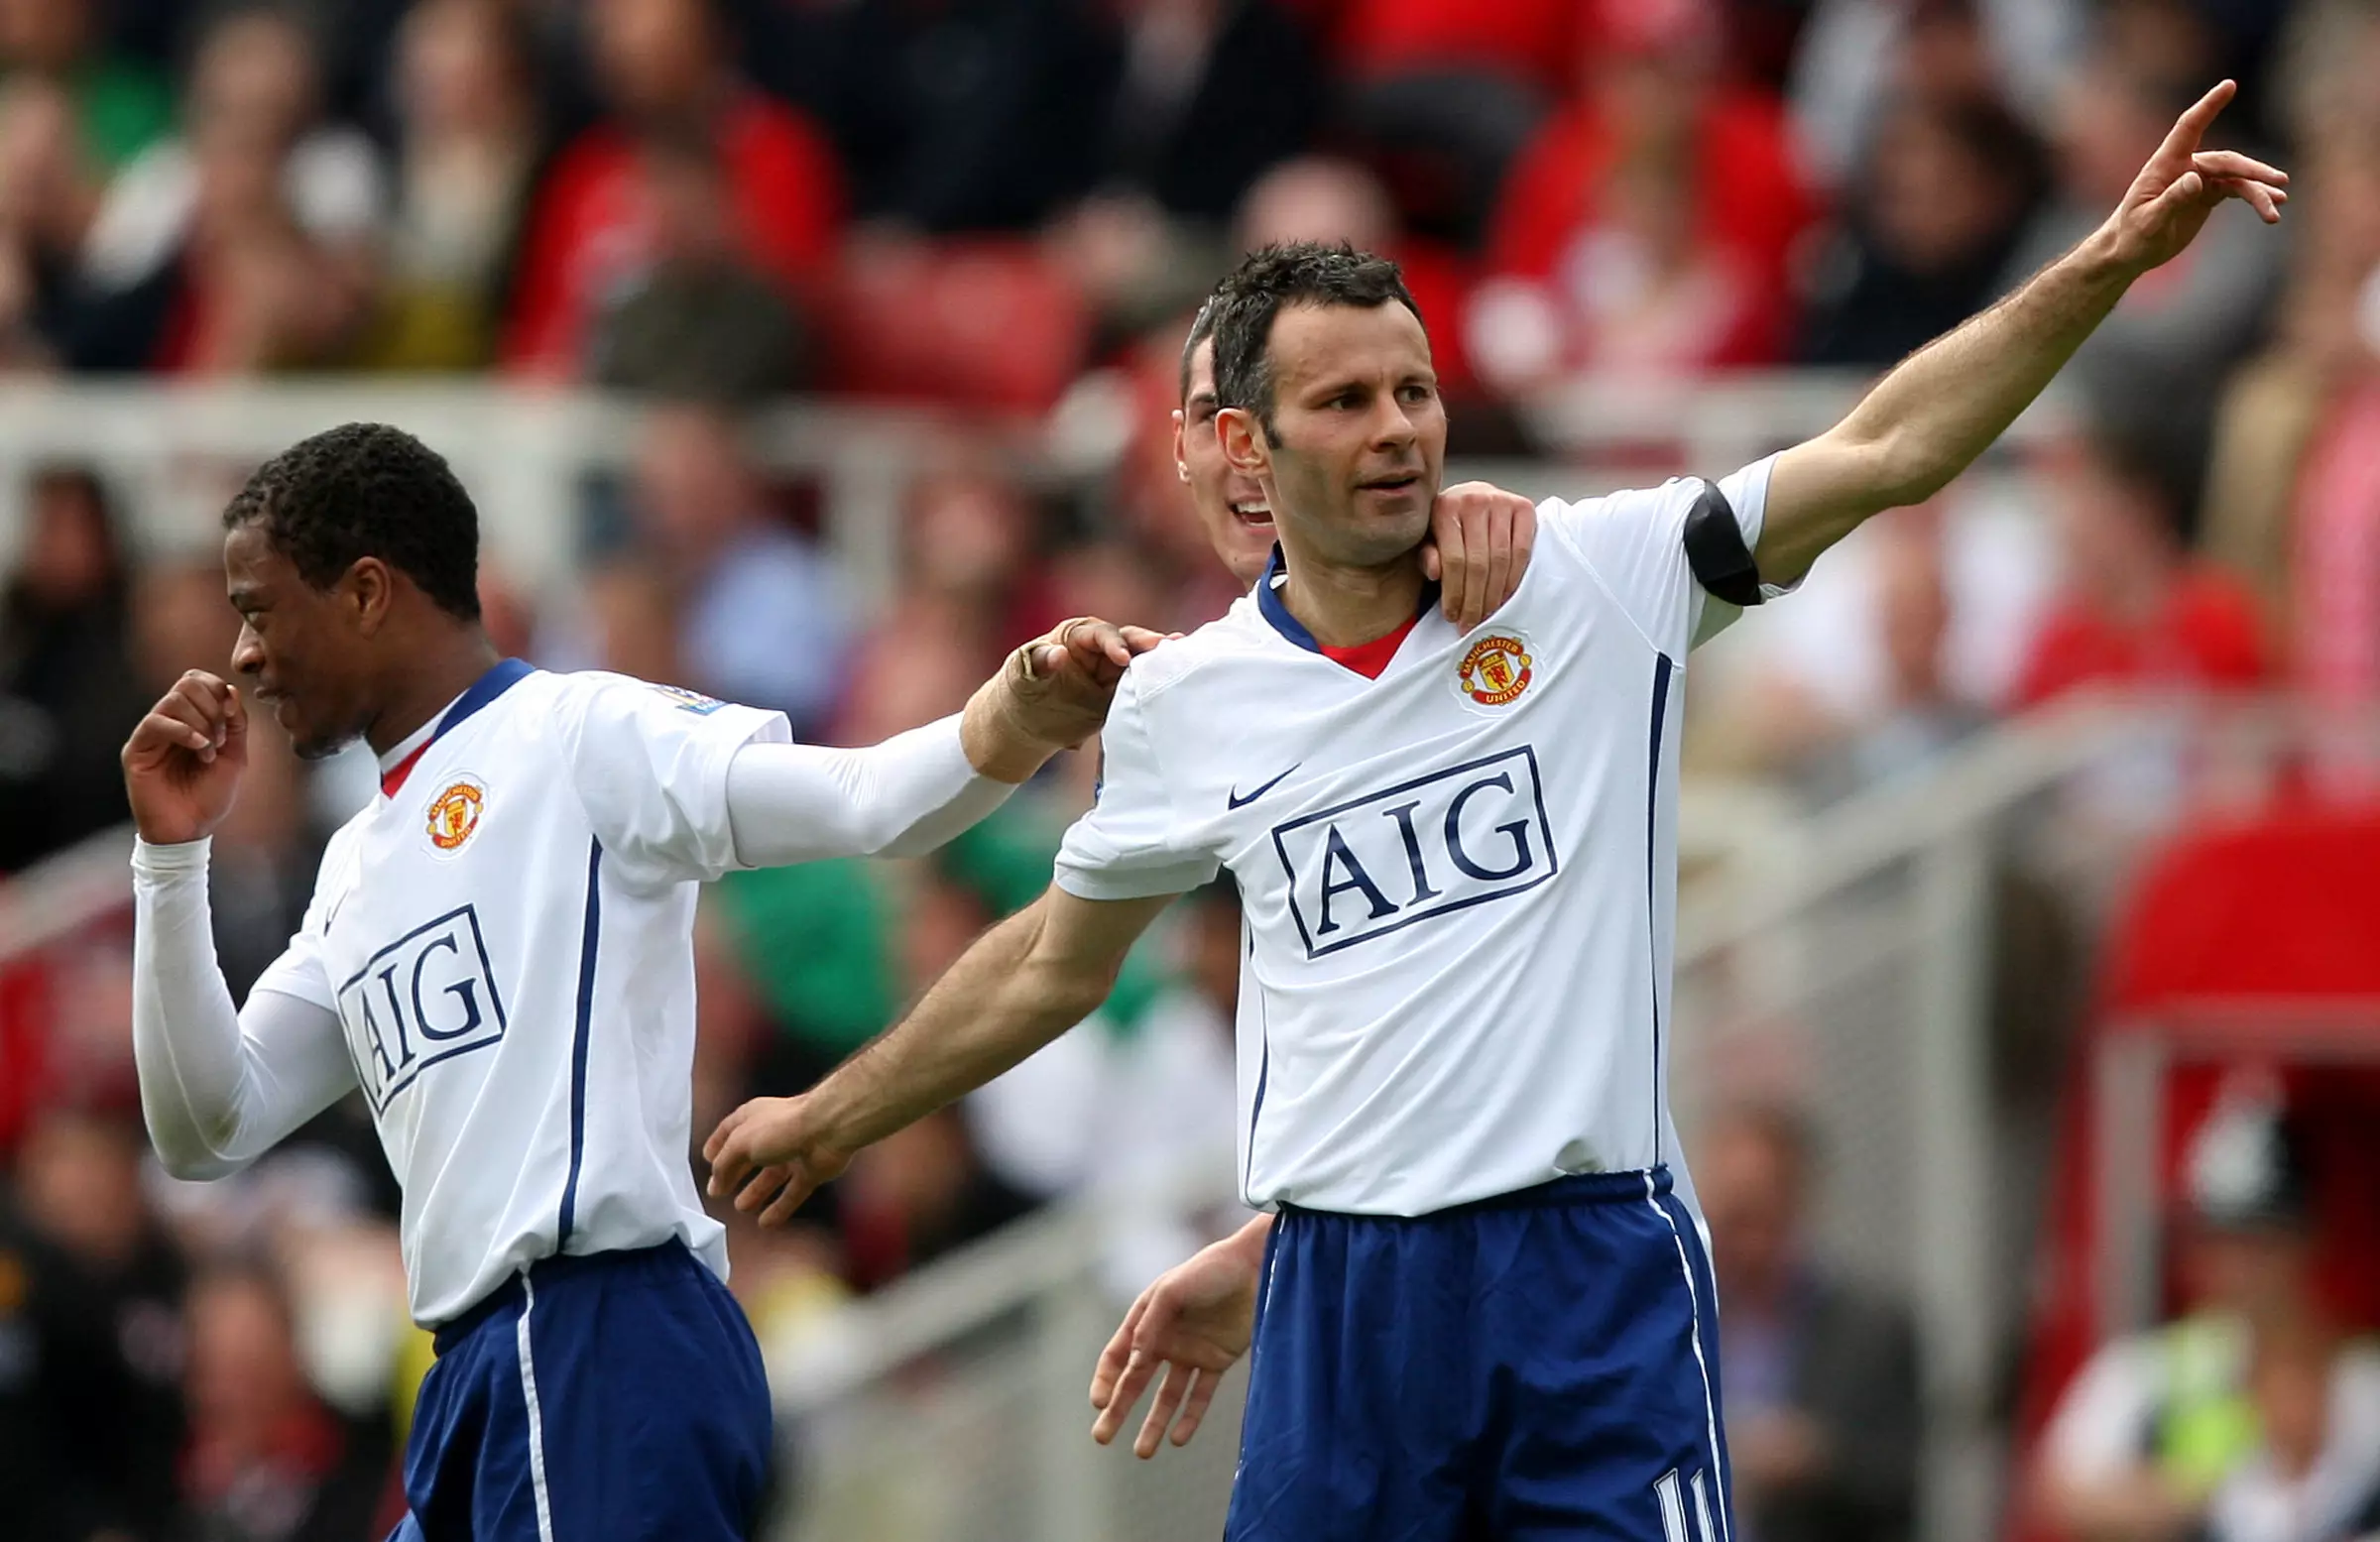 Patrice Evra Wishes Ryan Giggs Happy Birthday In Most Evra Way Possible